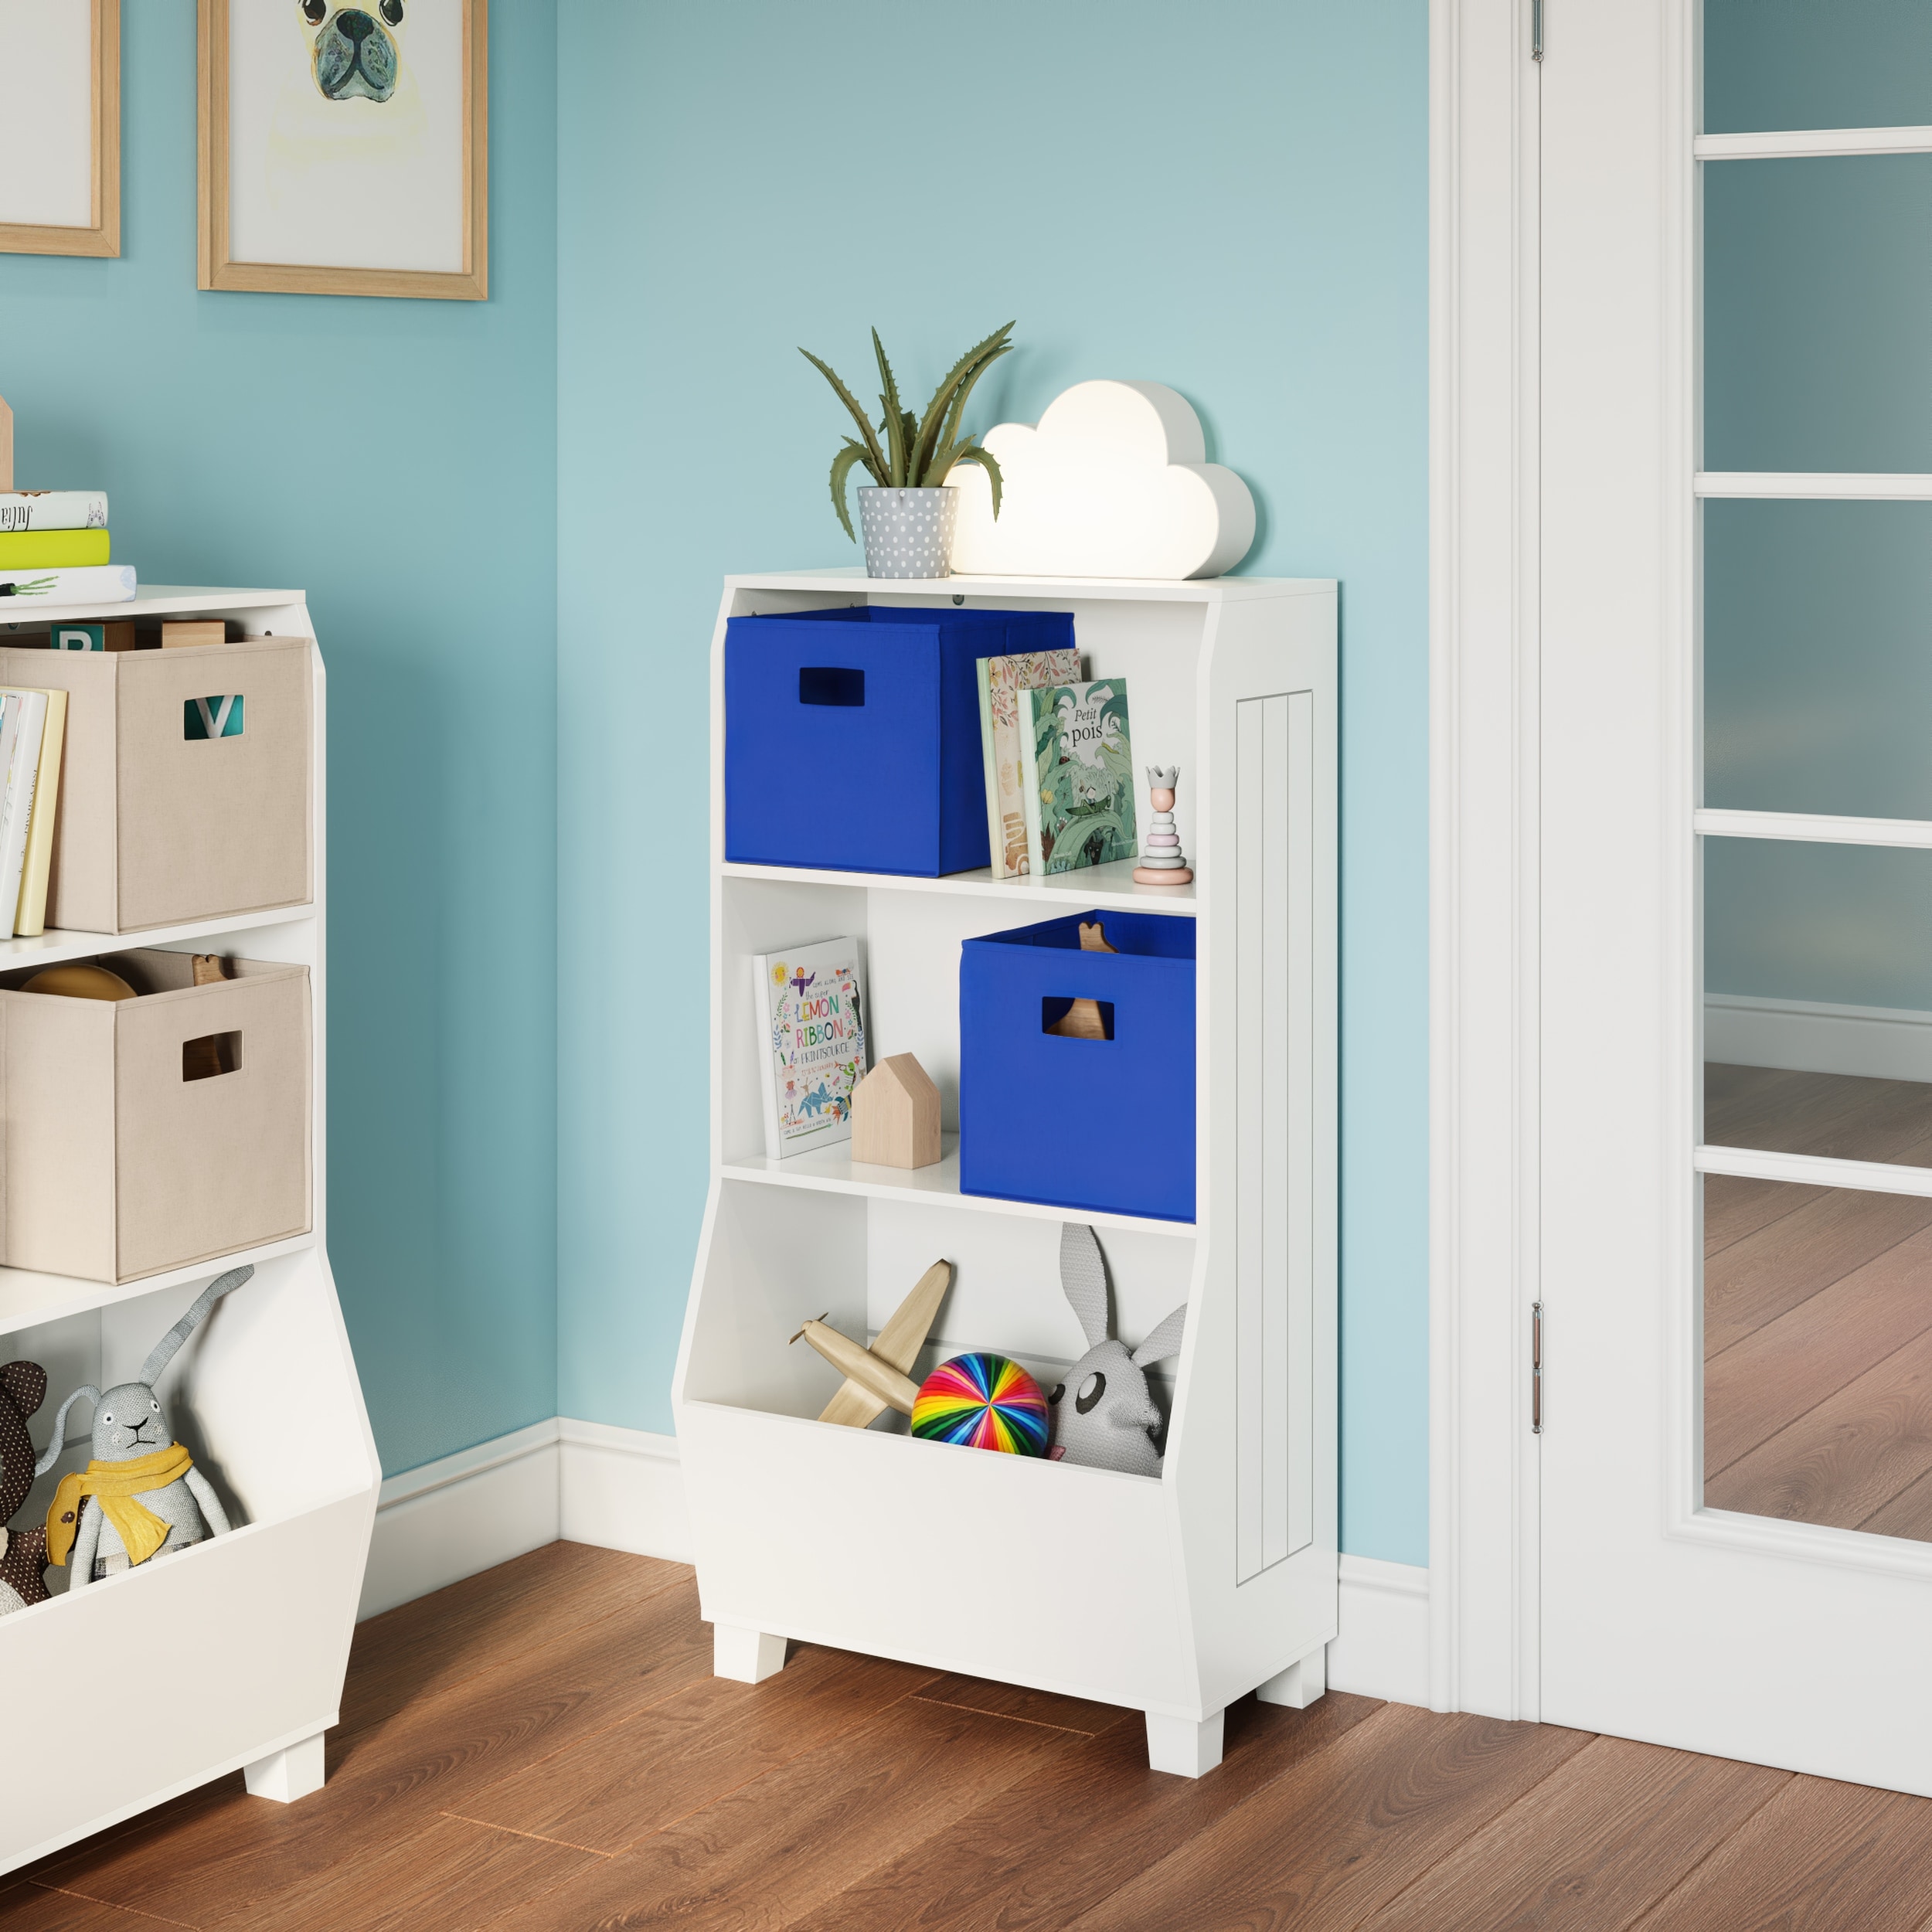 https://ak1.ostkcdn.com/images/products/is/images/direct/def1499704f73365d6b22c06e9259a23dbc4a5d1/RiverRidge-Home-Kids-23-in.-Bookcase-with-Toy-Organizer%2C-White.jpg